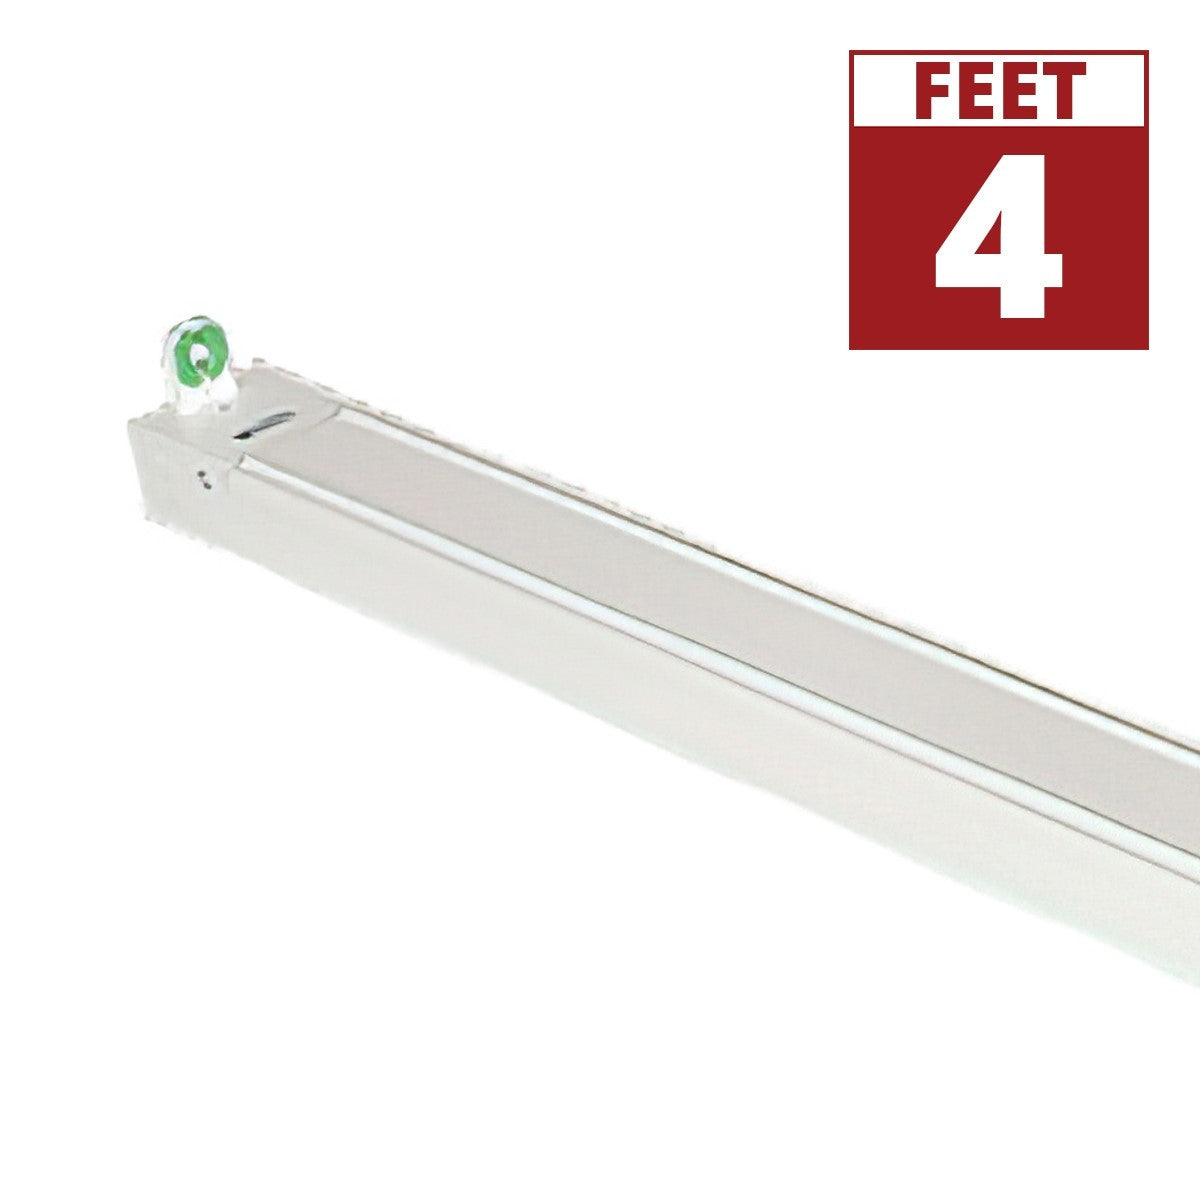 4ft LED Ready Strip Light 1-lamp Double End Wiring LED T5 Bulbs Not Included